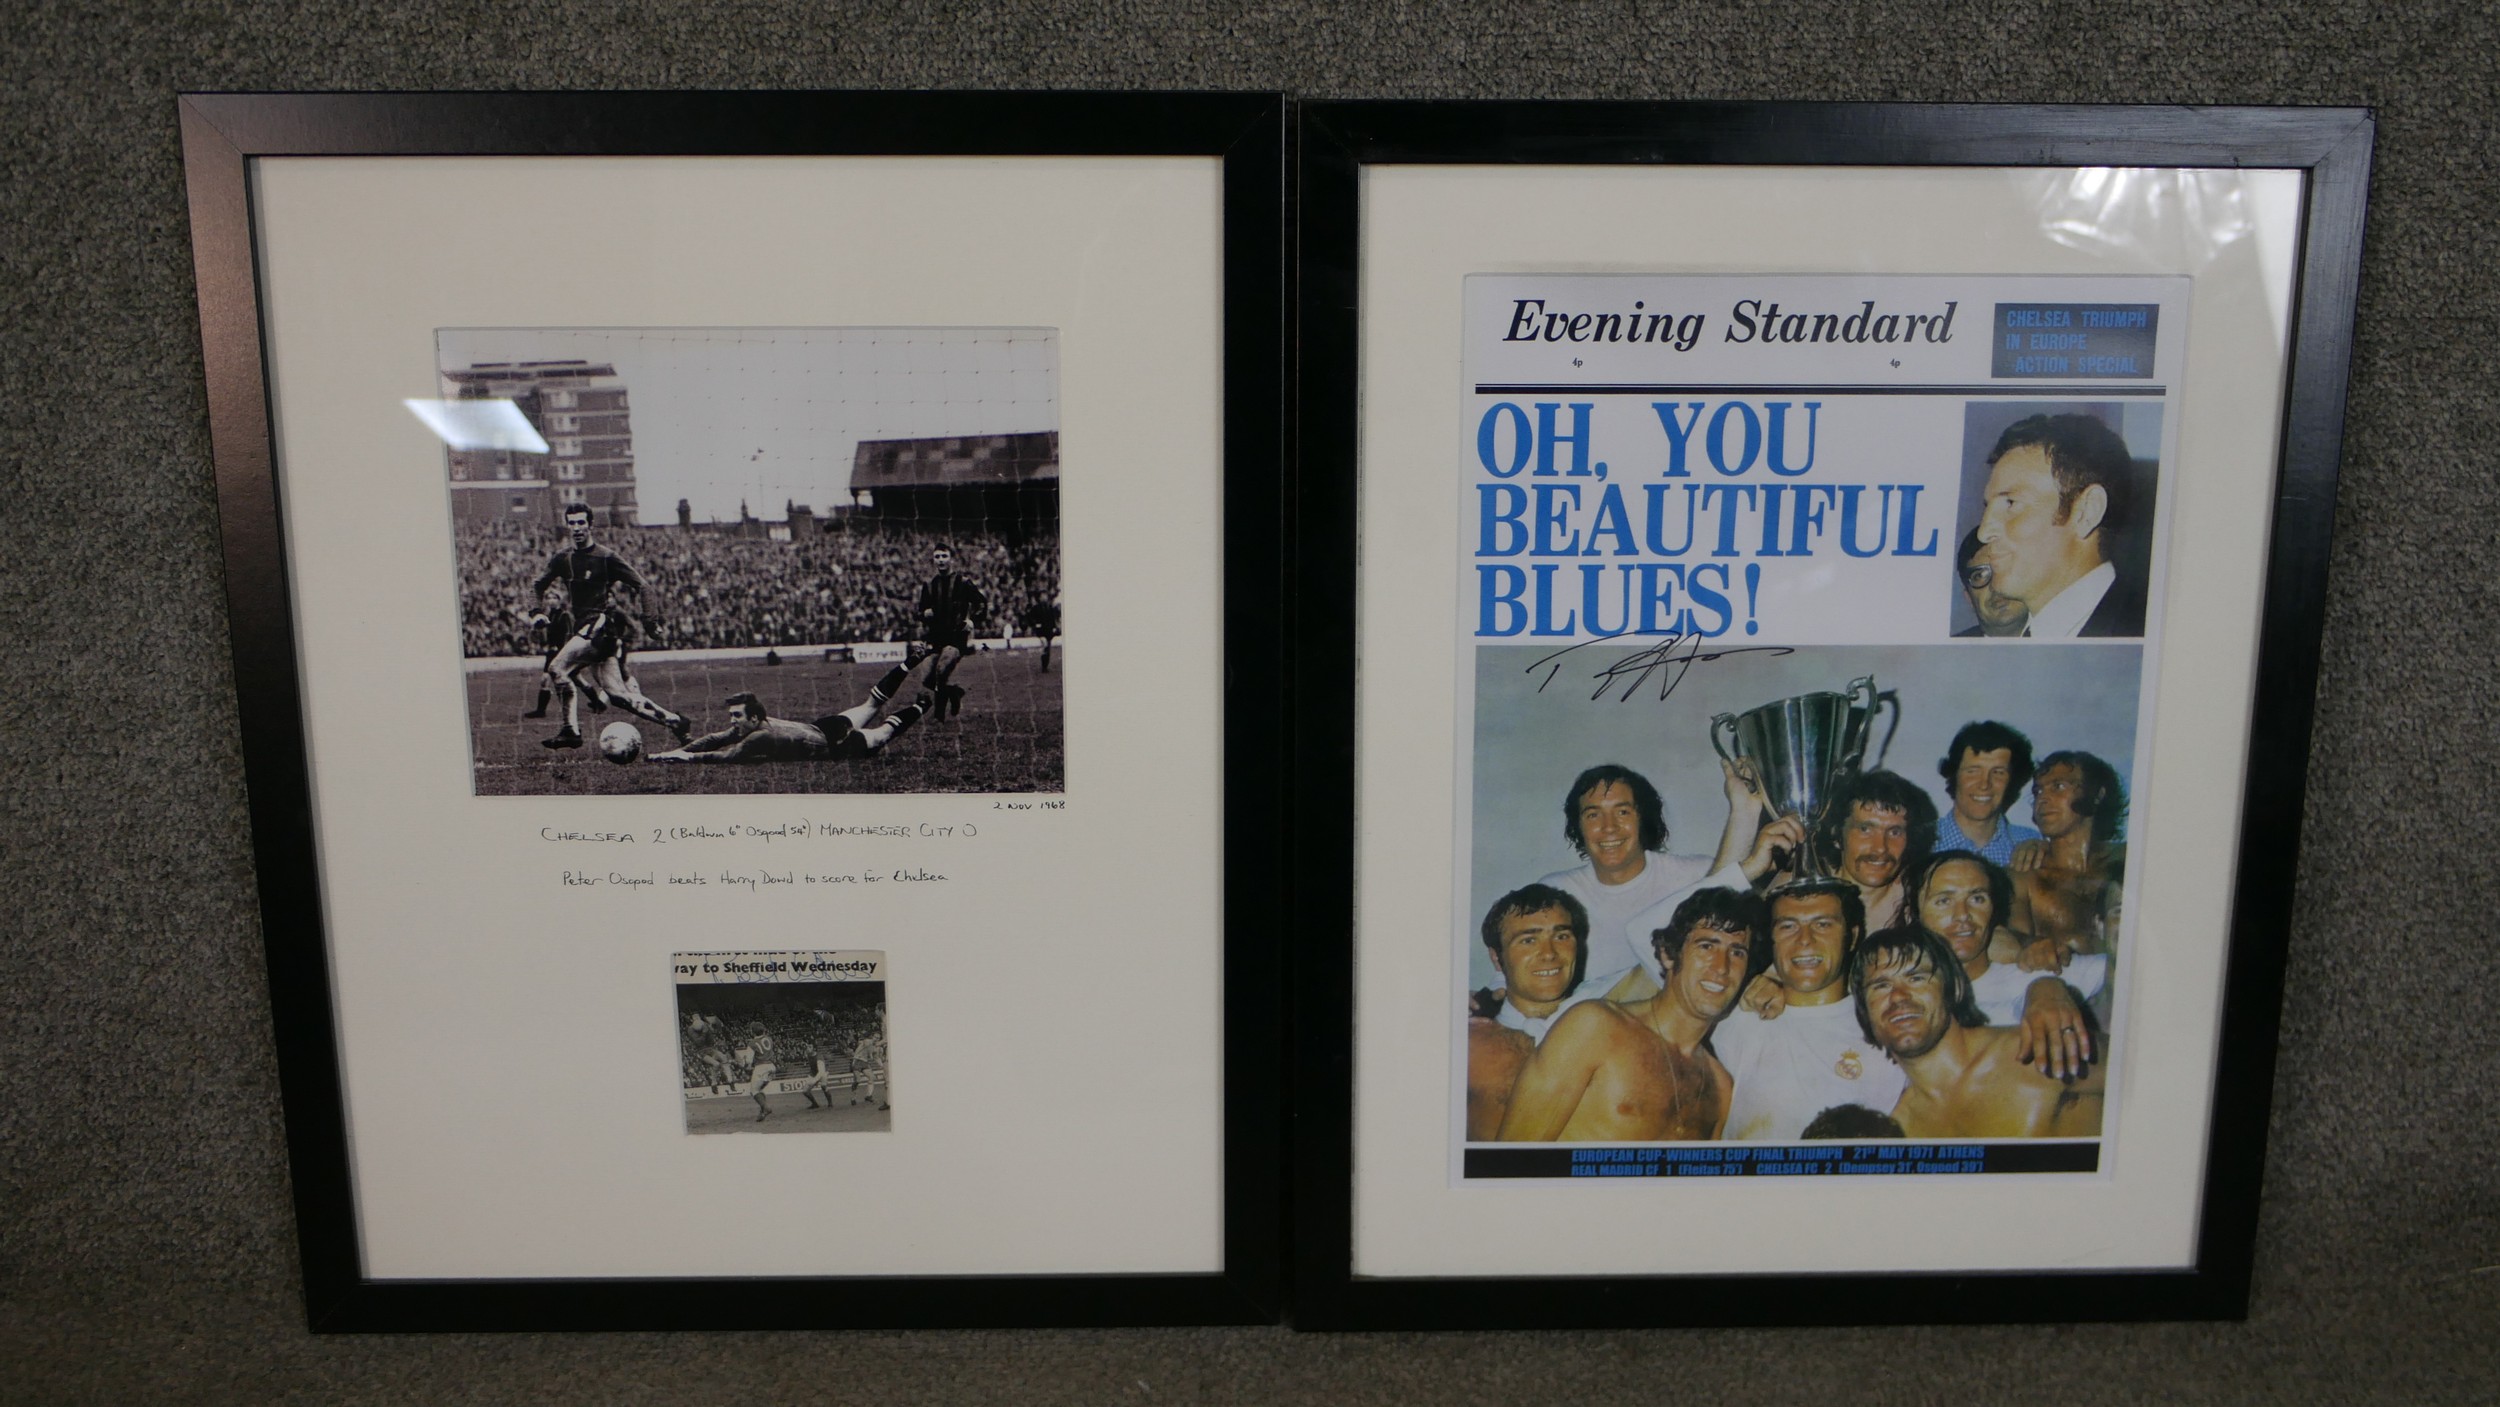 Two framed and glazed signed pieces of Chelsea F.C. memorabilia. A Peter Osgood signed press photo